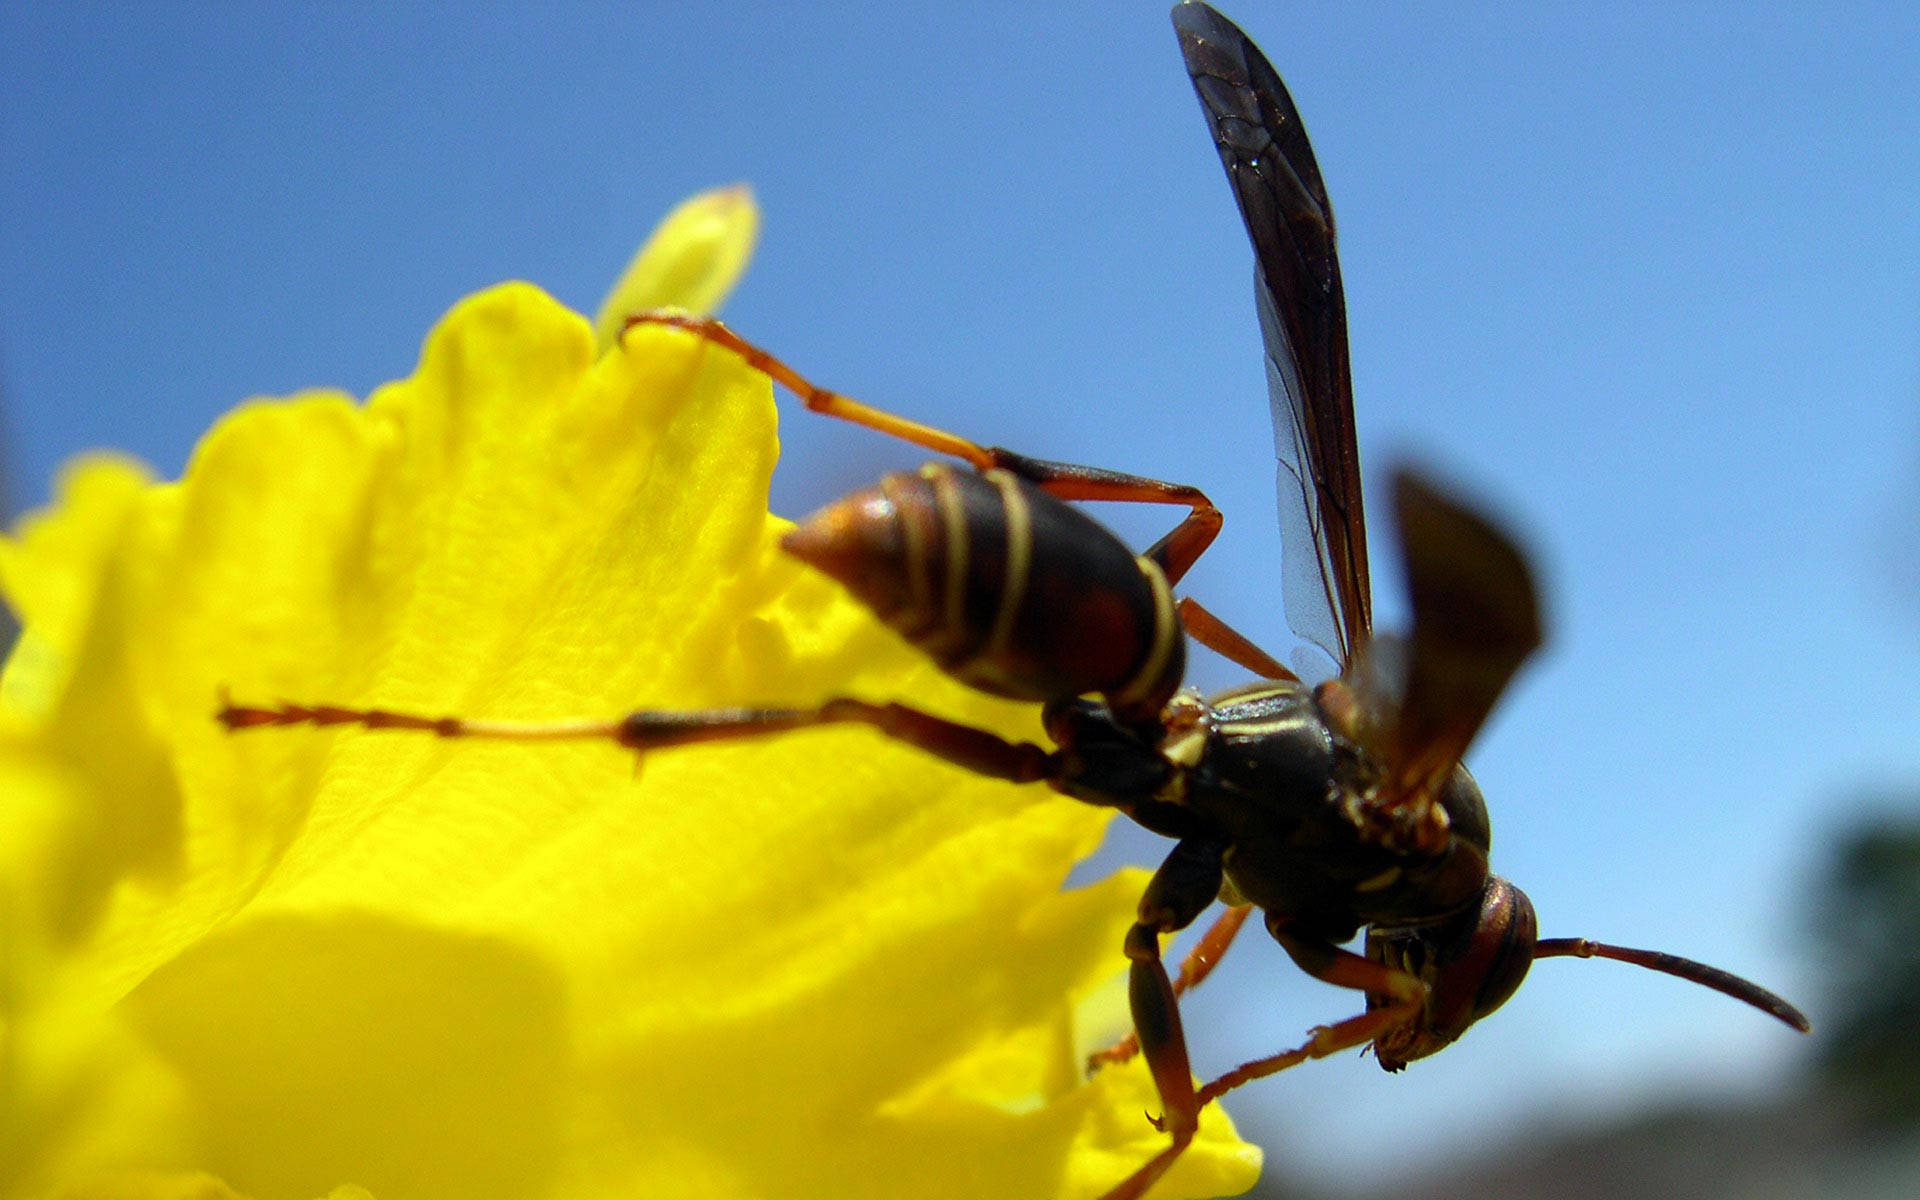 Insect Wasp On Yellow Flower